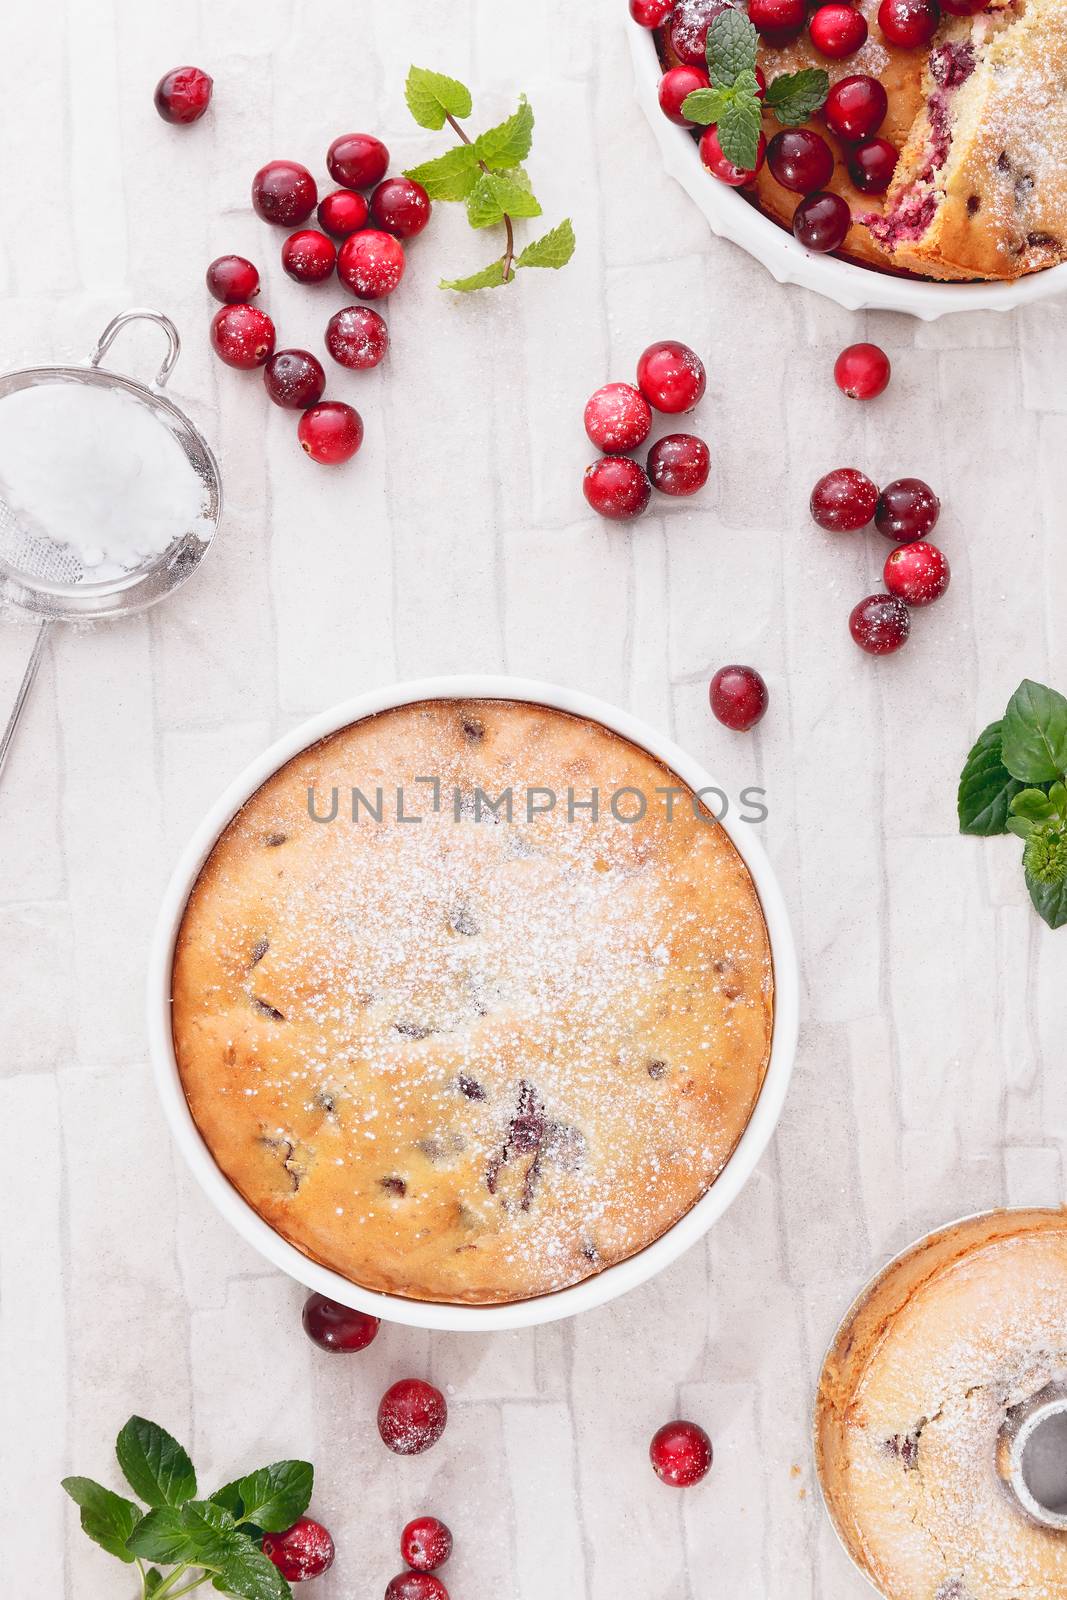 Cranberry Cake with Fresh Cranberries by Slast20